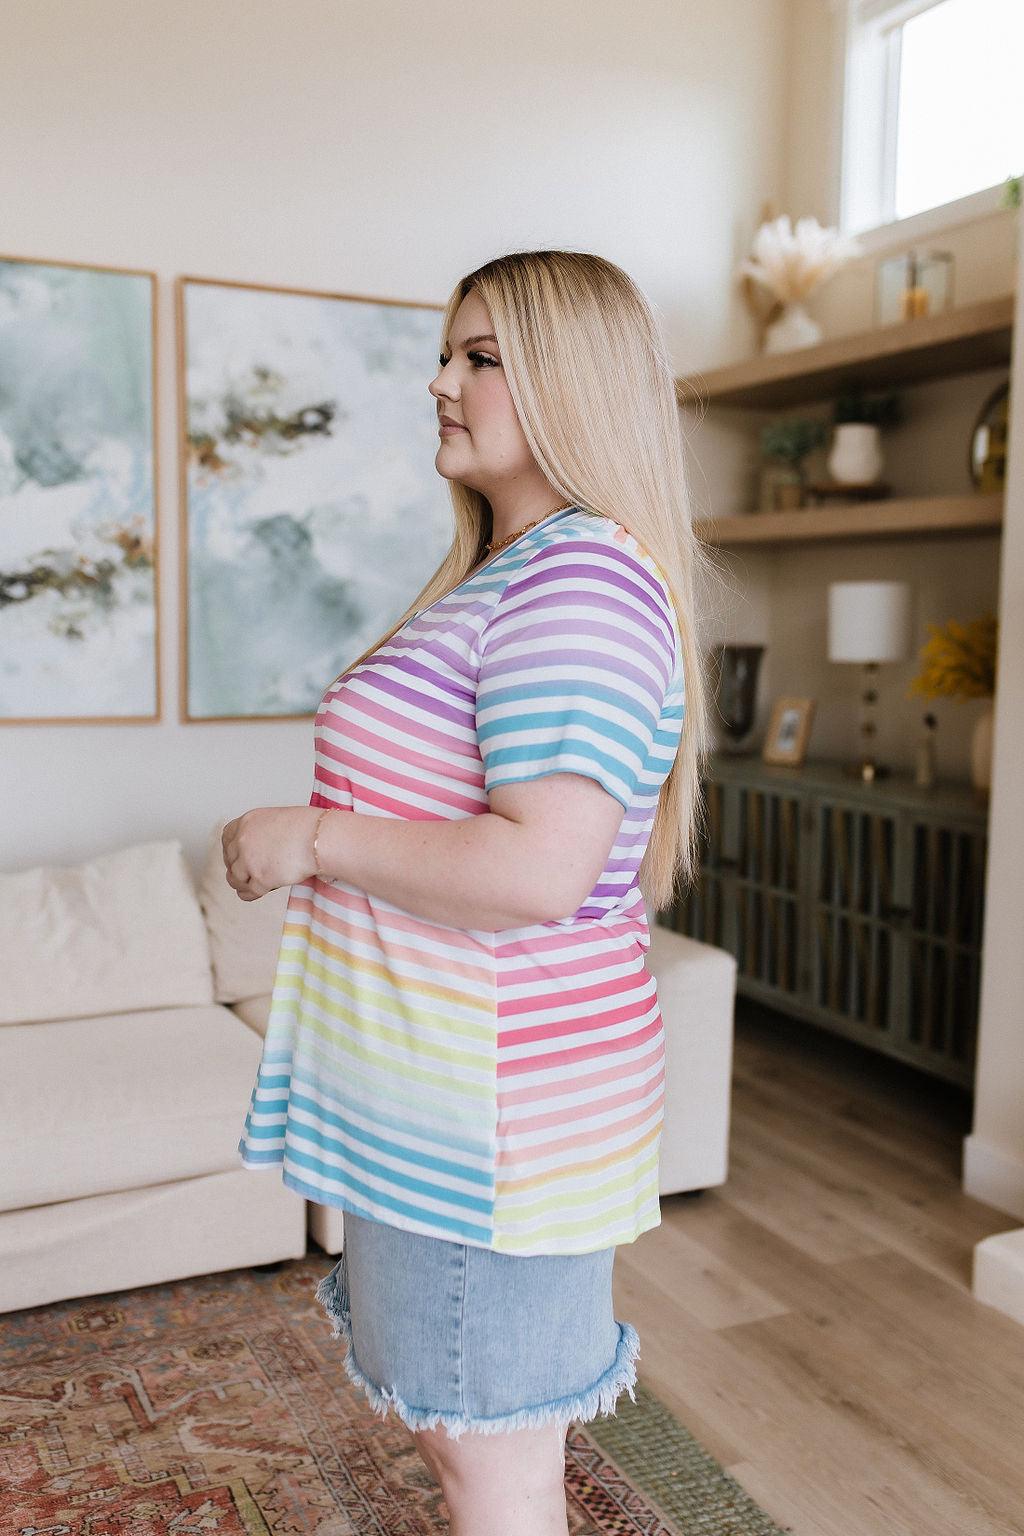 Looking for Rainbows V-Neck Striped Top Womens Ave Shops   